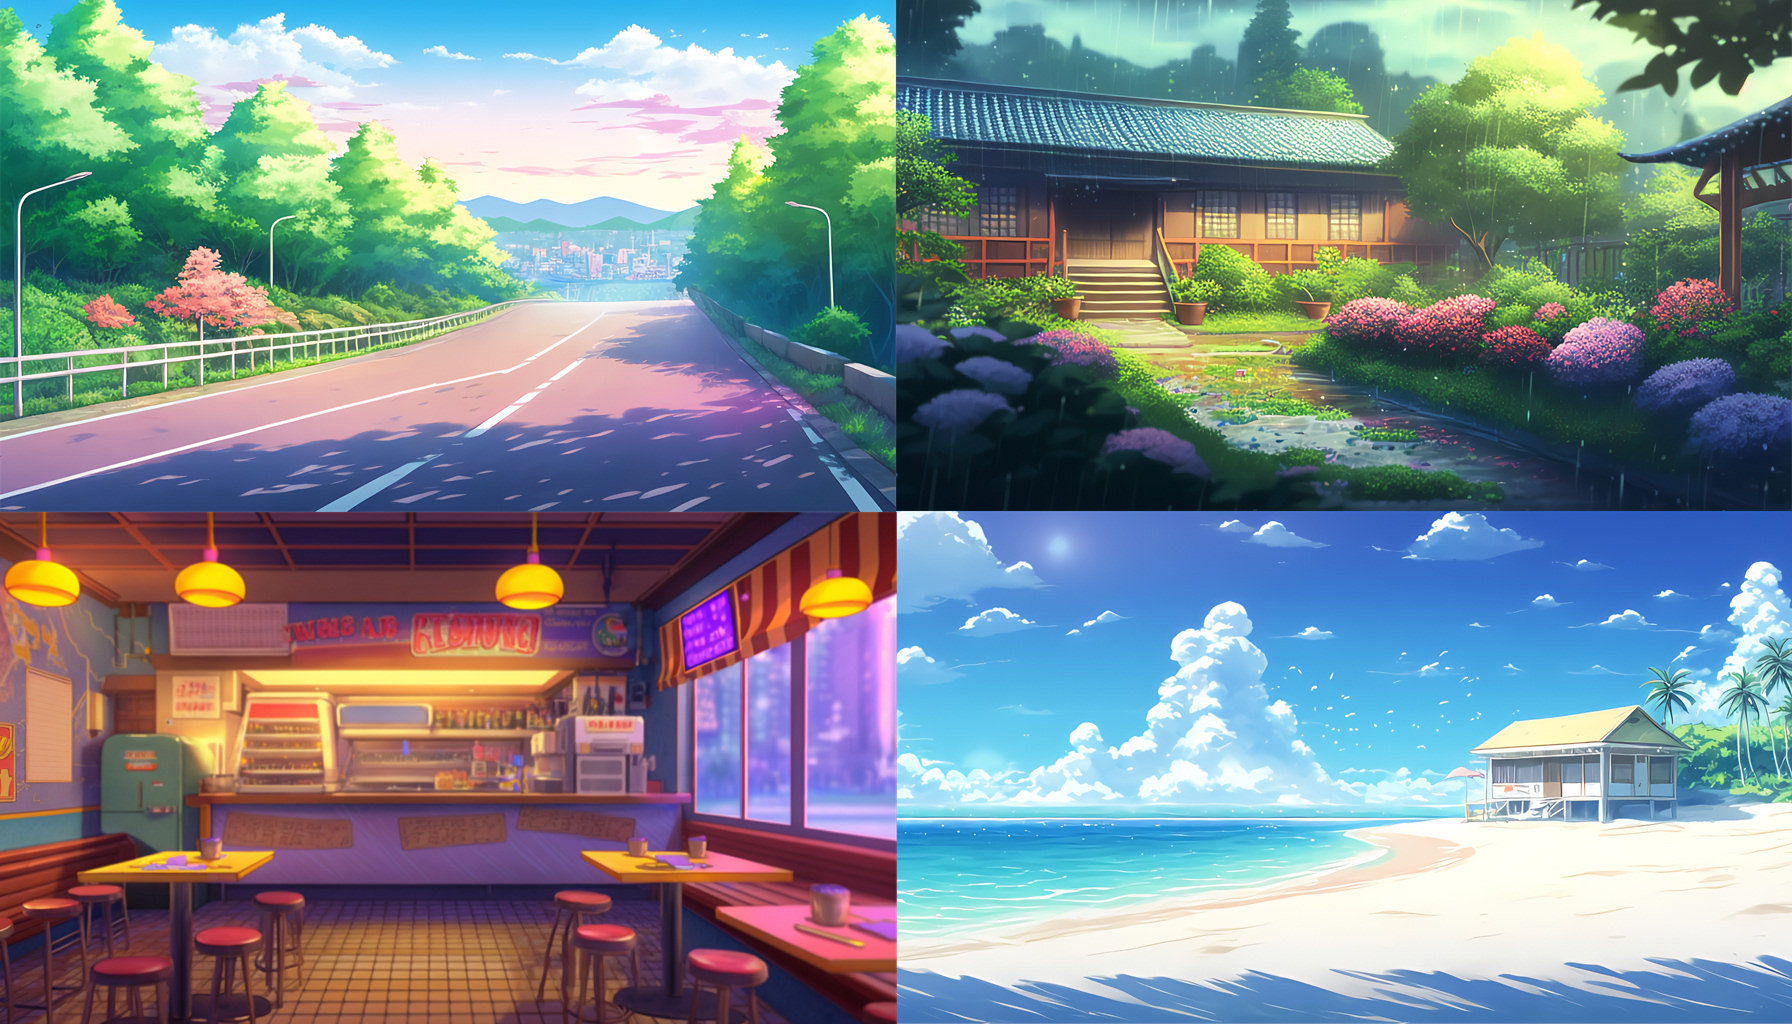 109 Free Visual Novel Backgrounds - generated with Midjourney AI!